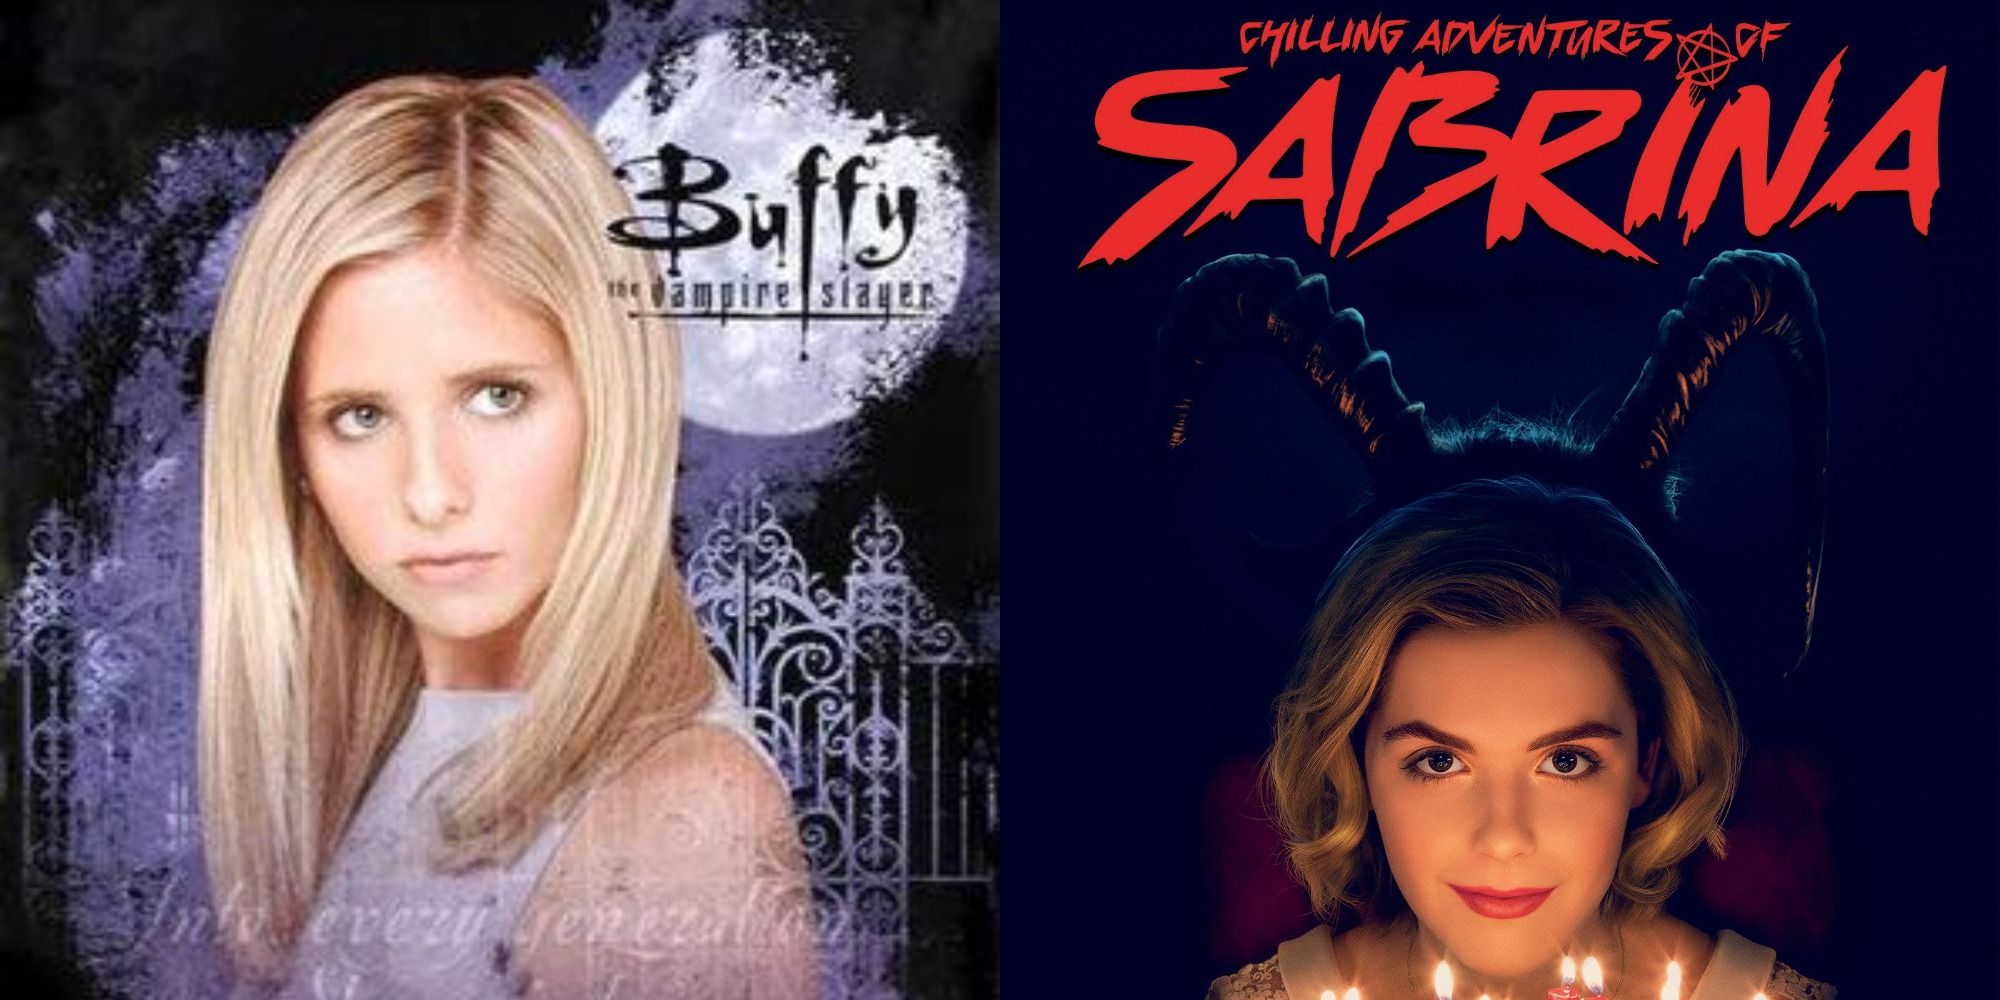 Two side by side images of the posters for Buffy the Vampire Slayer and Chilling Adventures of Sabrina